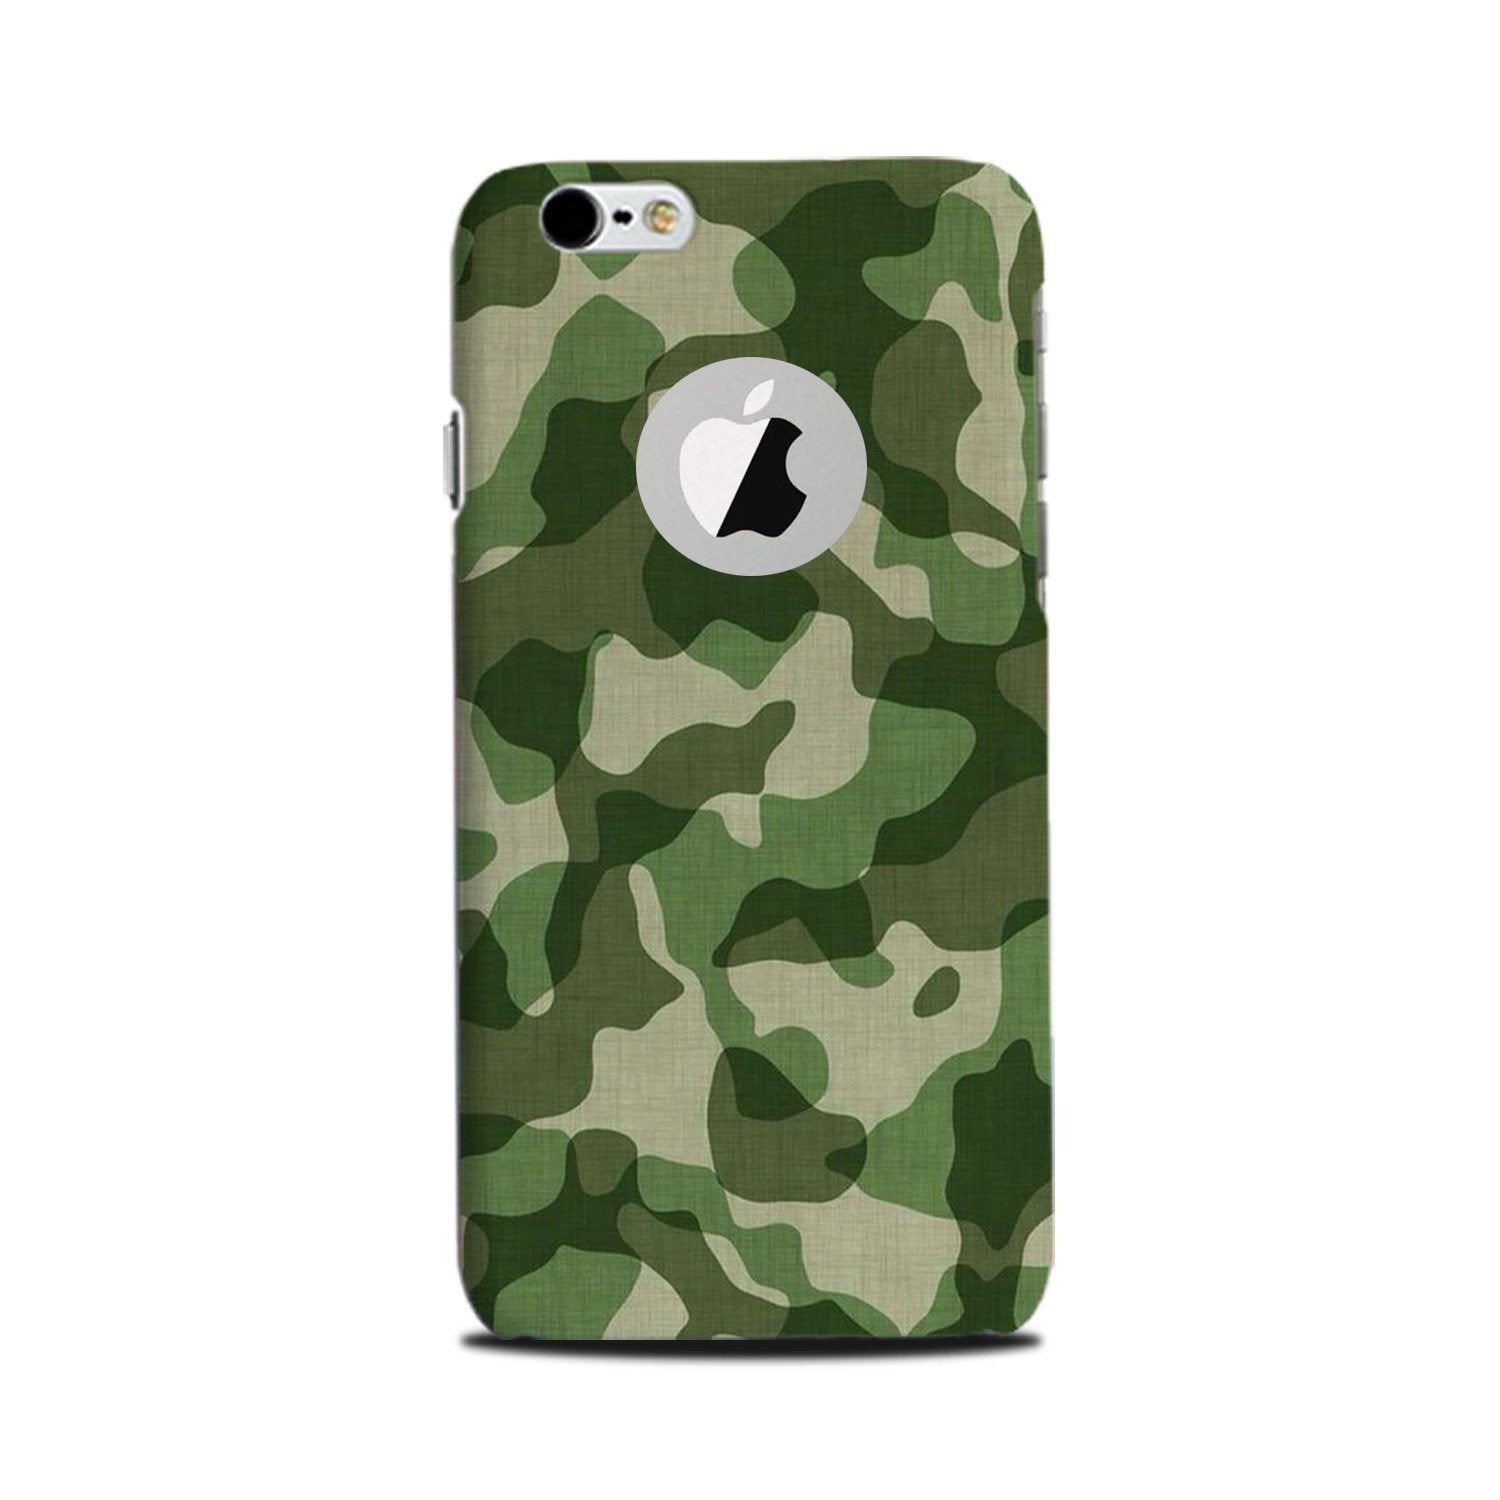 Cover for iPhone 6 / 6s Supreme Brown Camouflage Design Cover